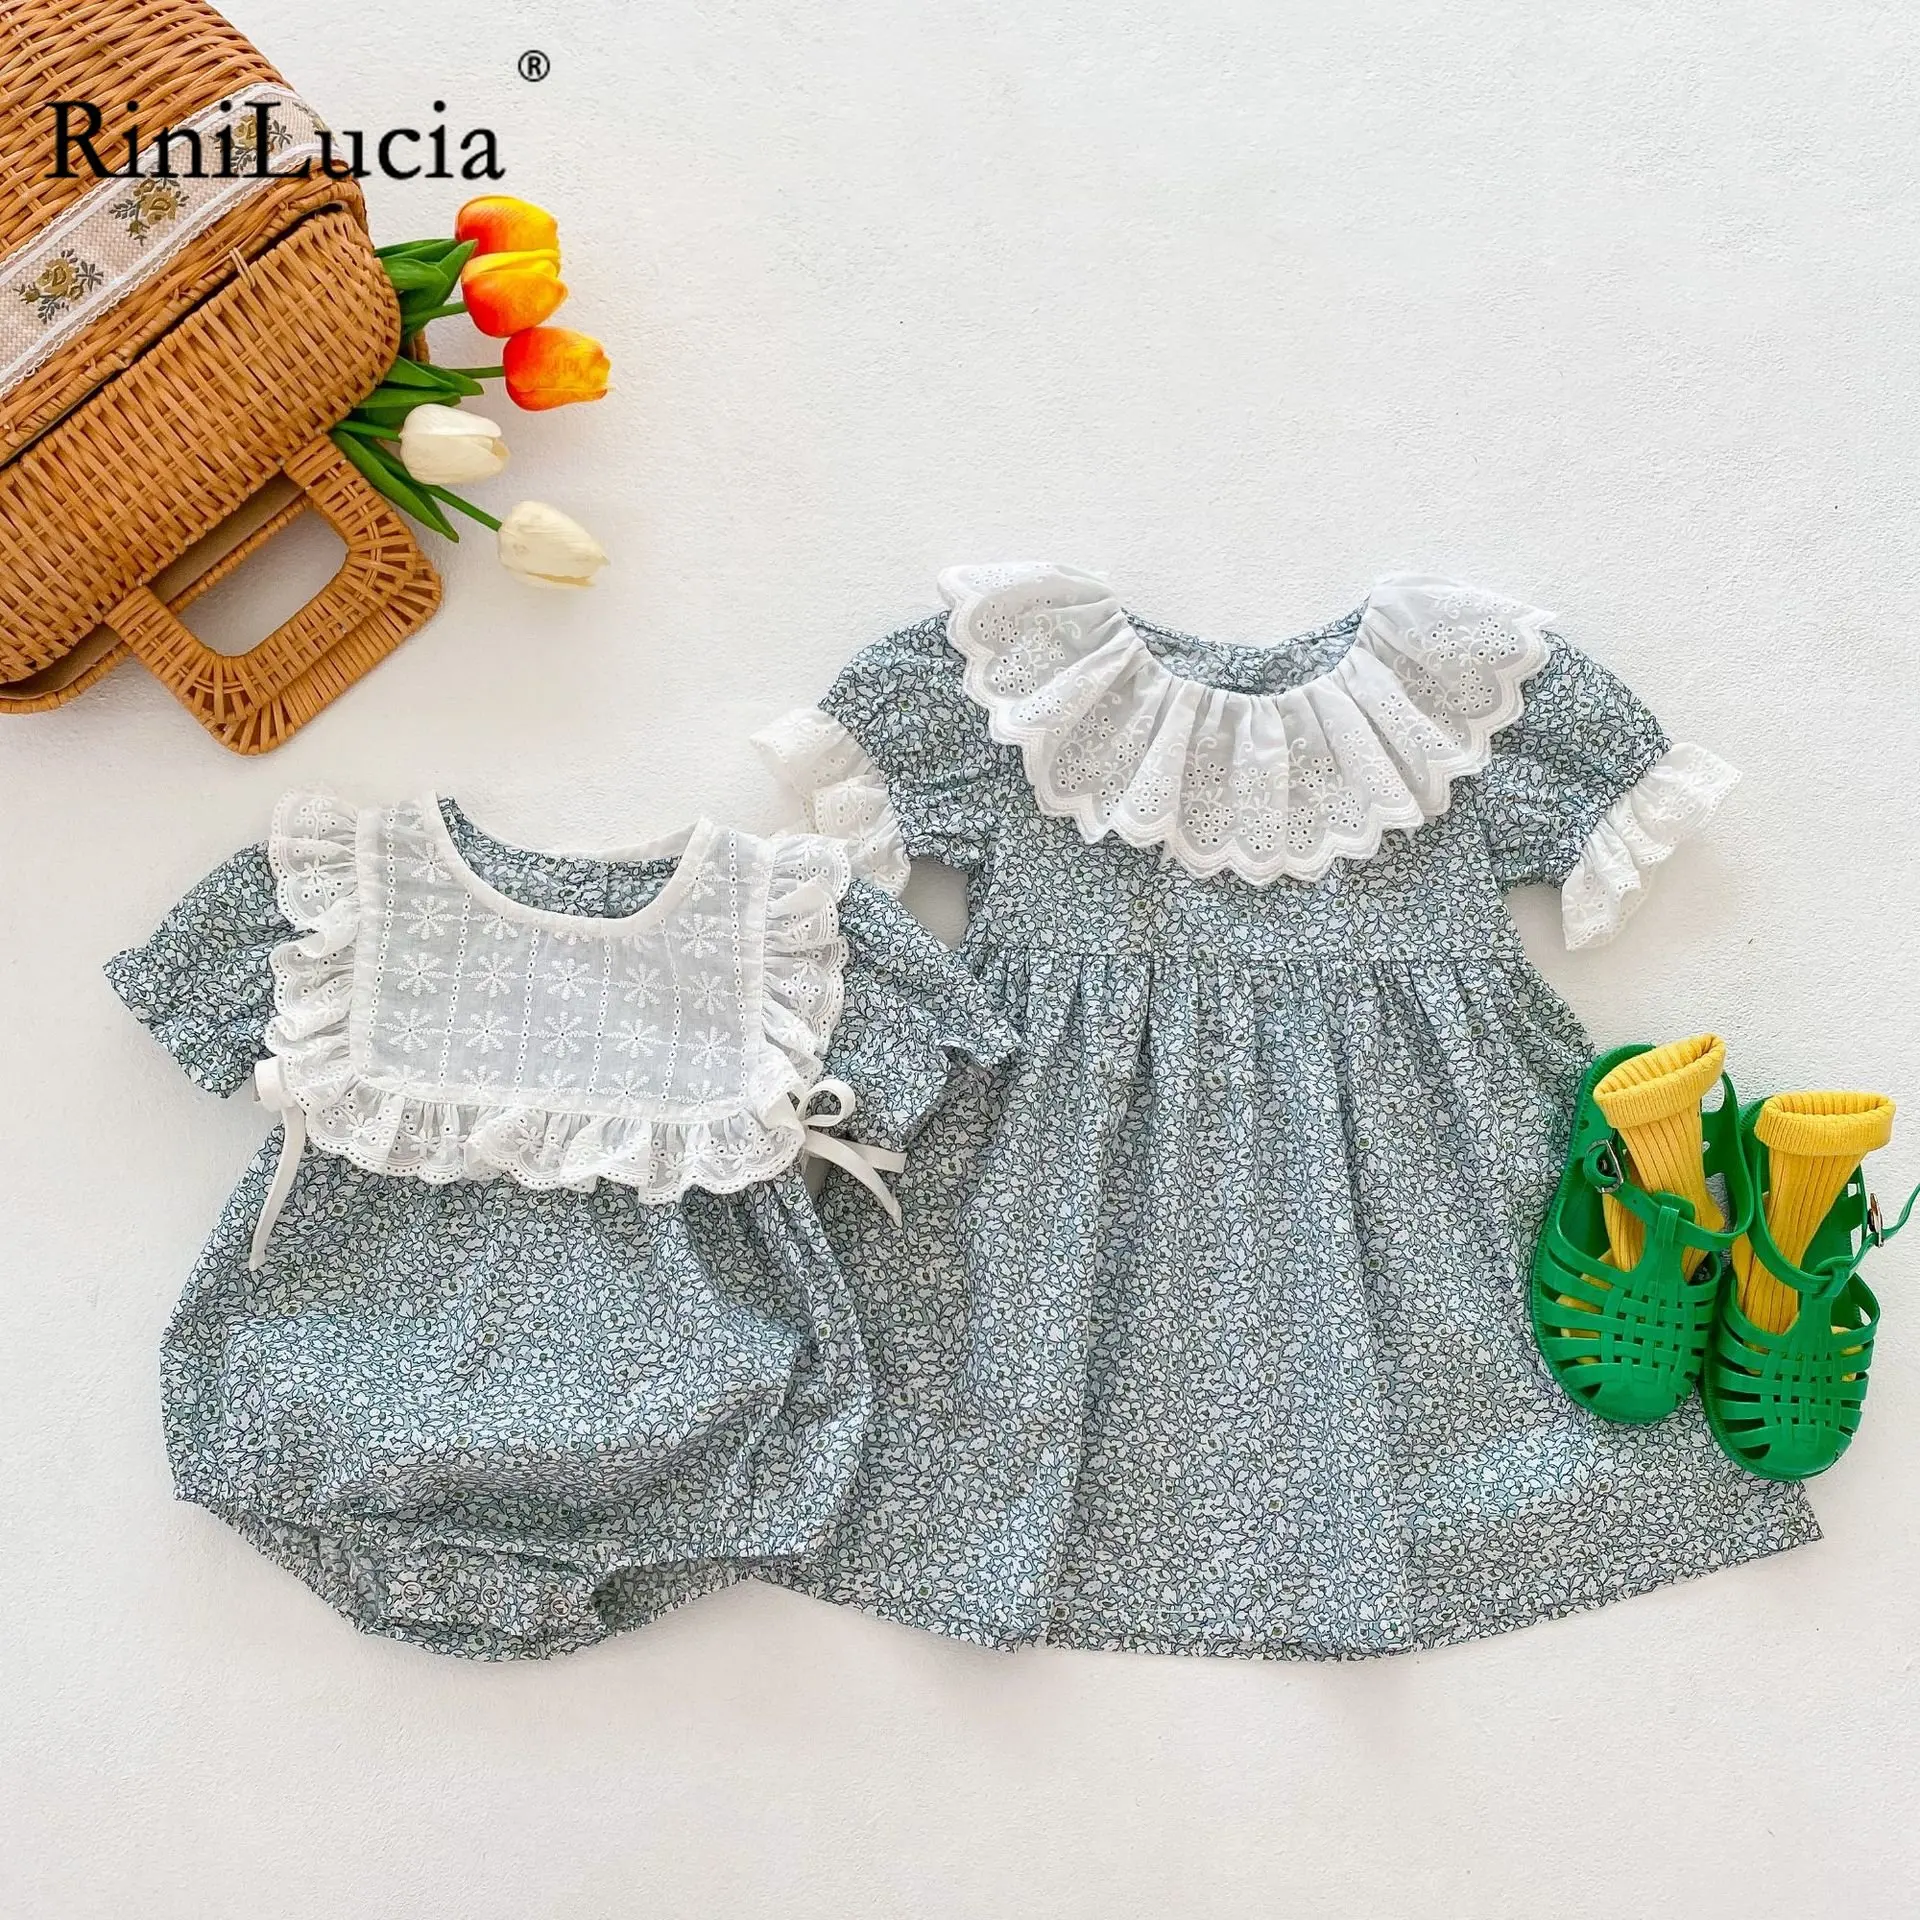 

RiniLucia 0-18M Kids Summer Short Sleeve Floral Romper Elegant Casual Cute lovely Girls Outfits Newborn Sunsuit Baby Clothes C01